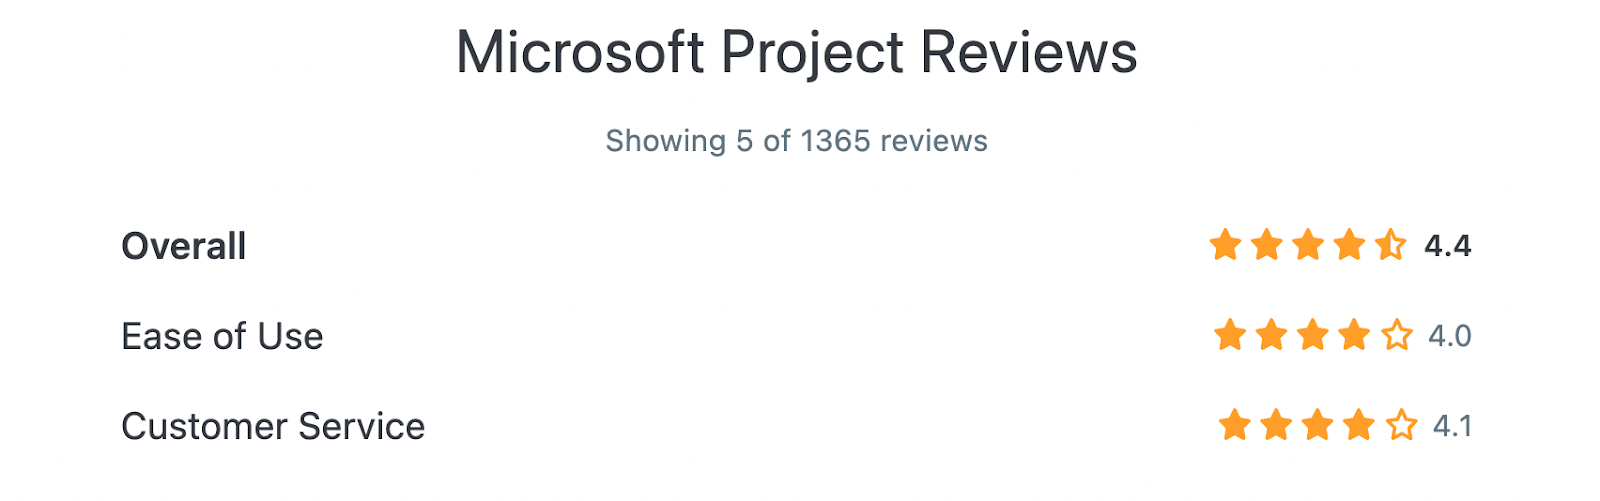 Microsoft Project reviews on Capterra (Overall: 4.4, Ease of Use: 4.0, Customer Service: 4.1)